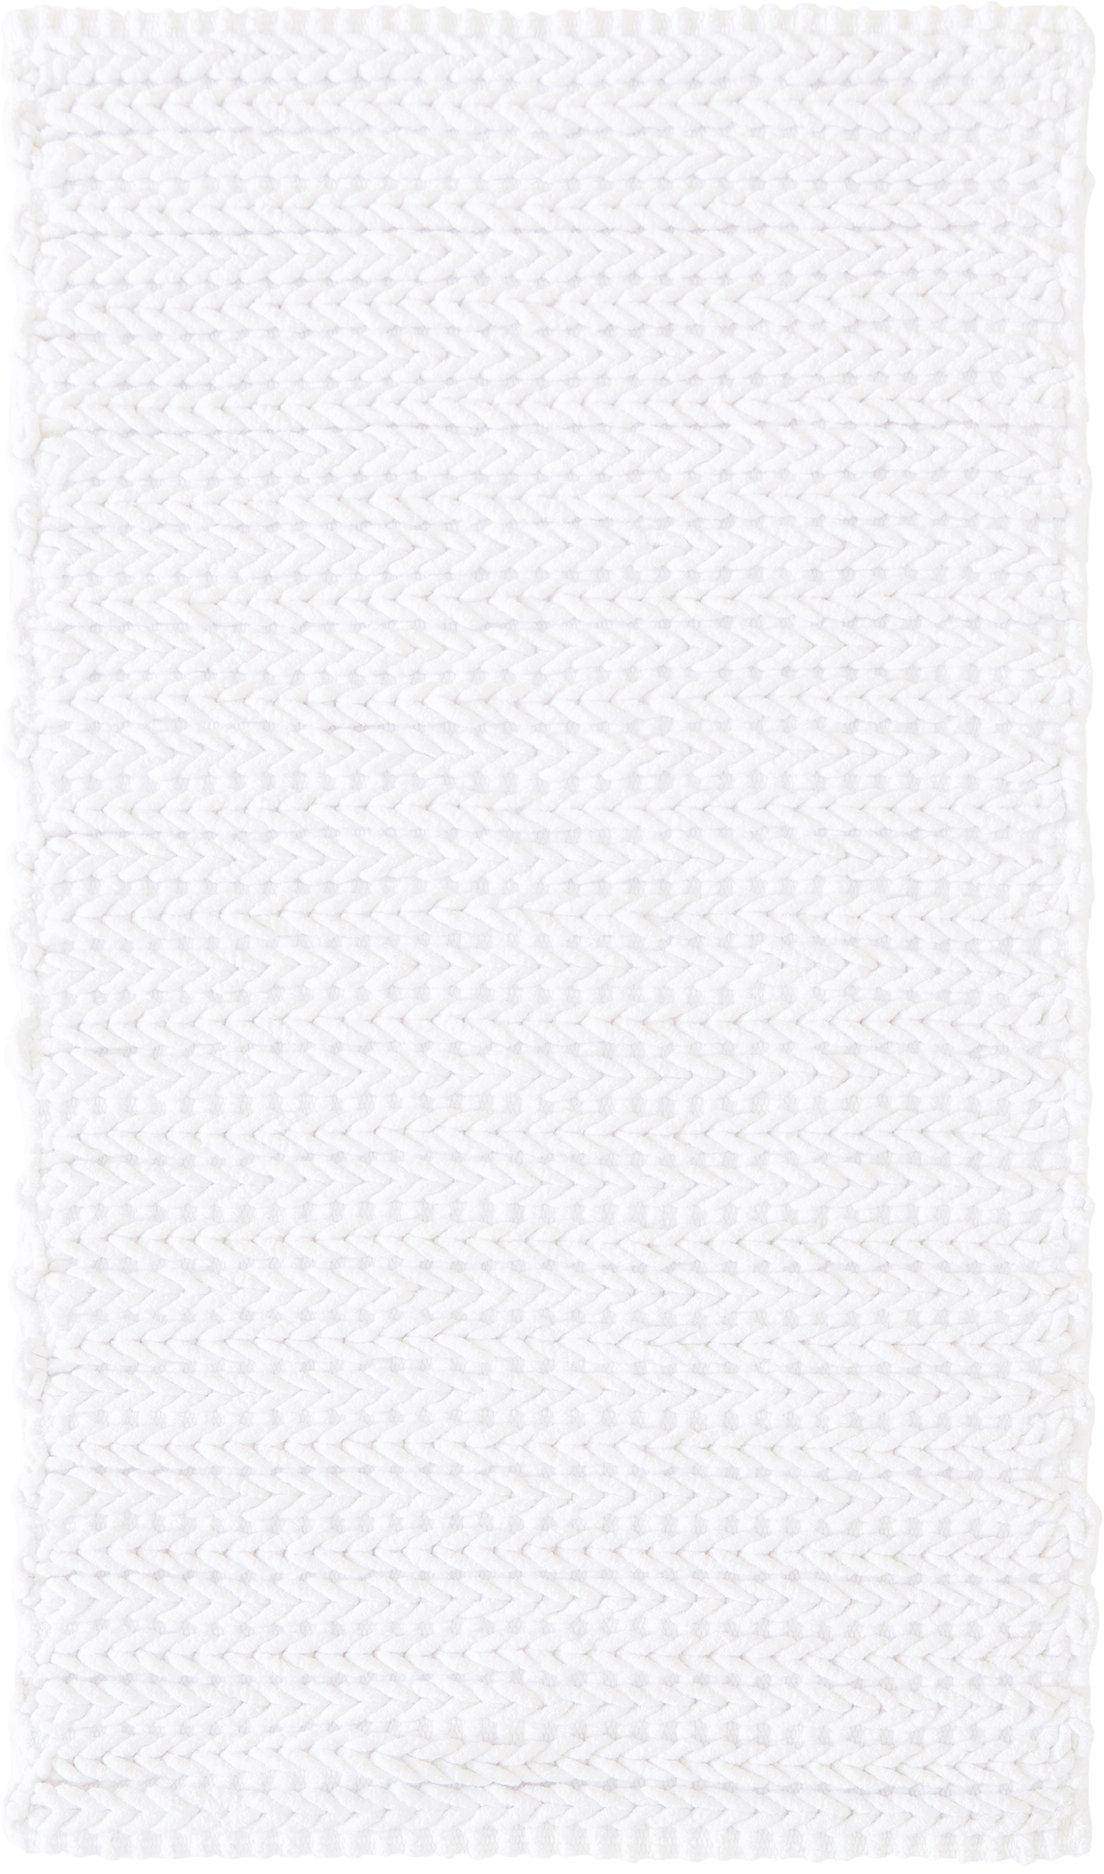 Madison Park Lasso Yarn Dyed Chenille Chain Stitch Rug